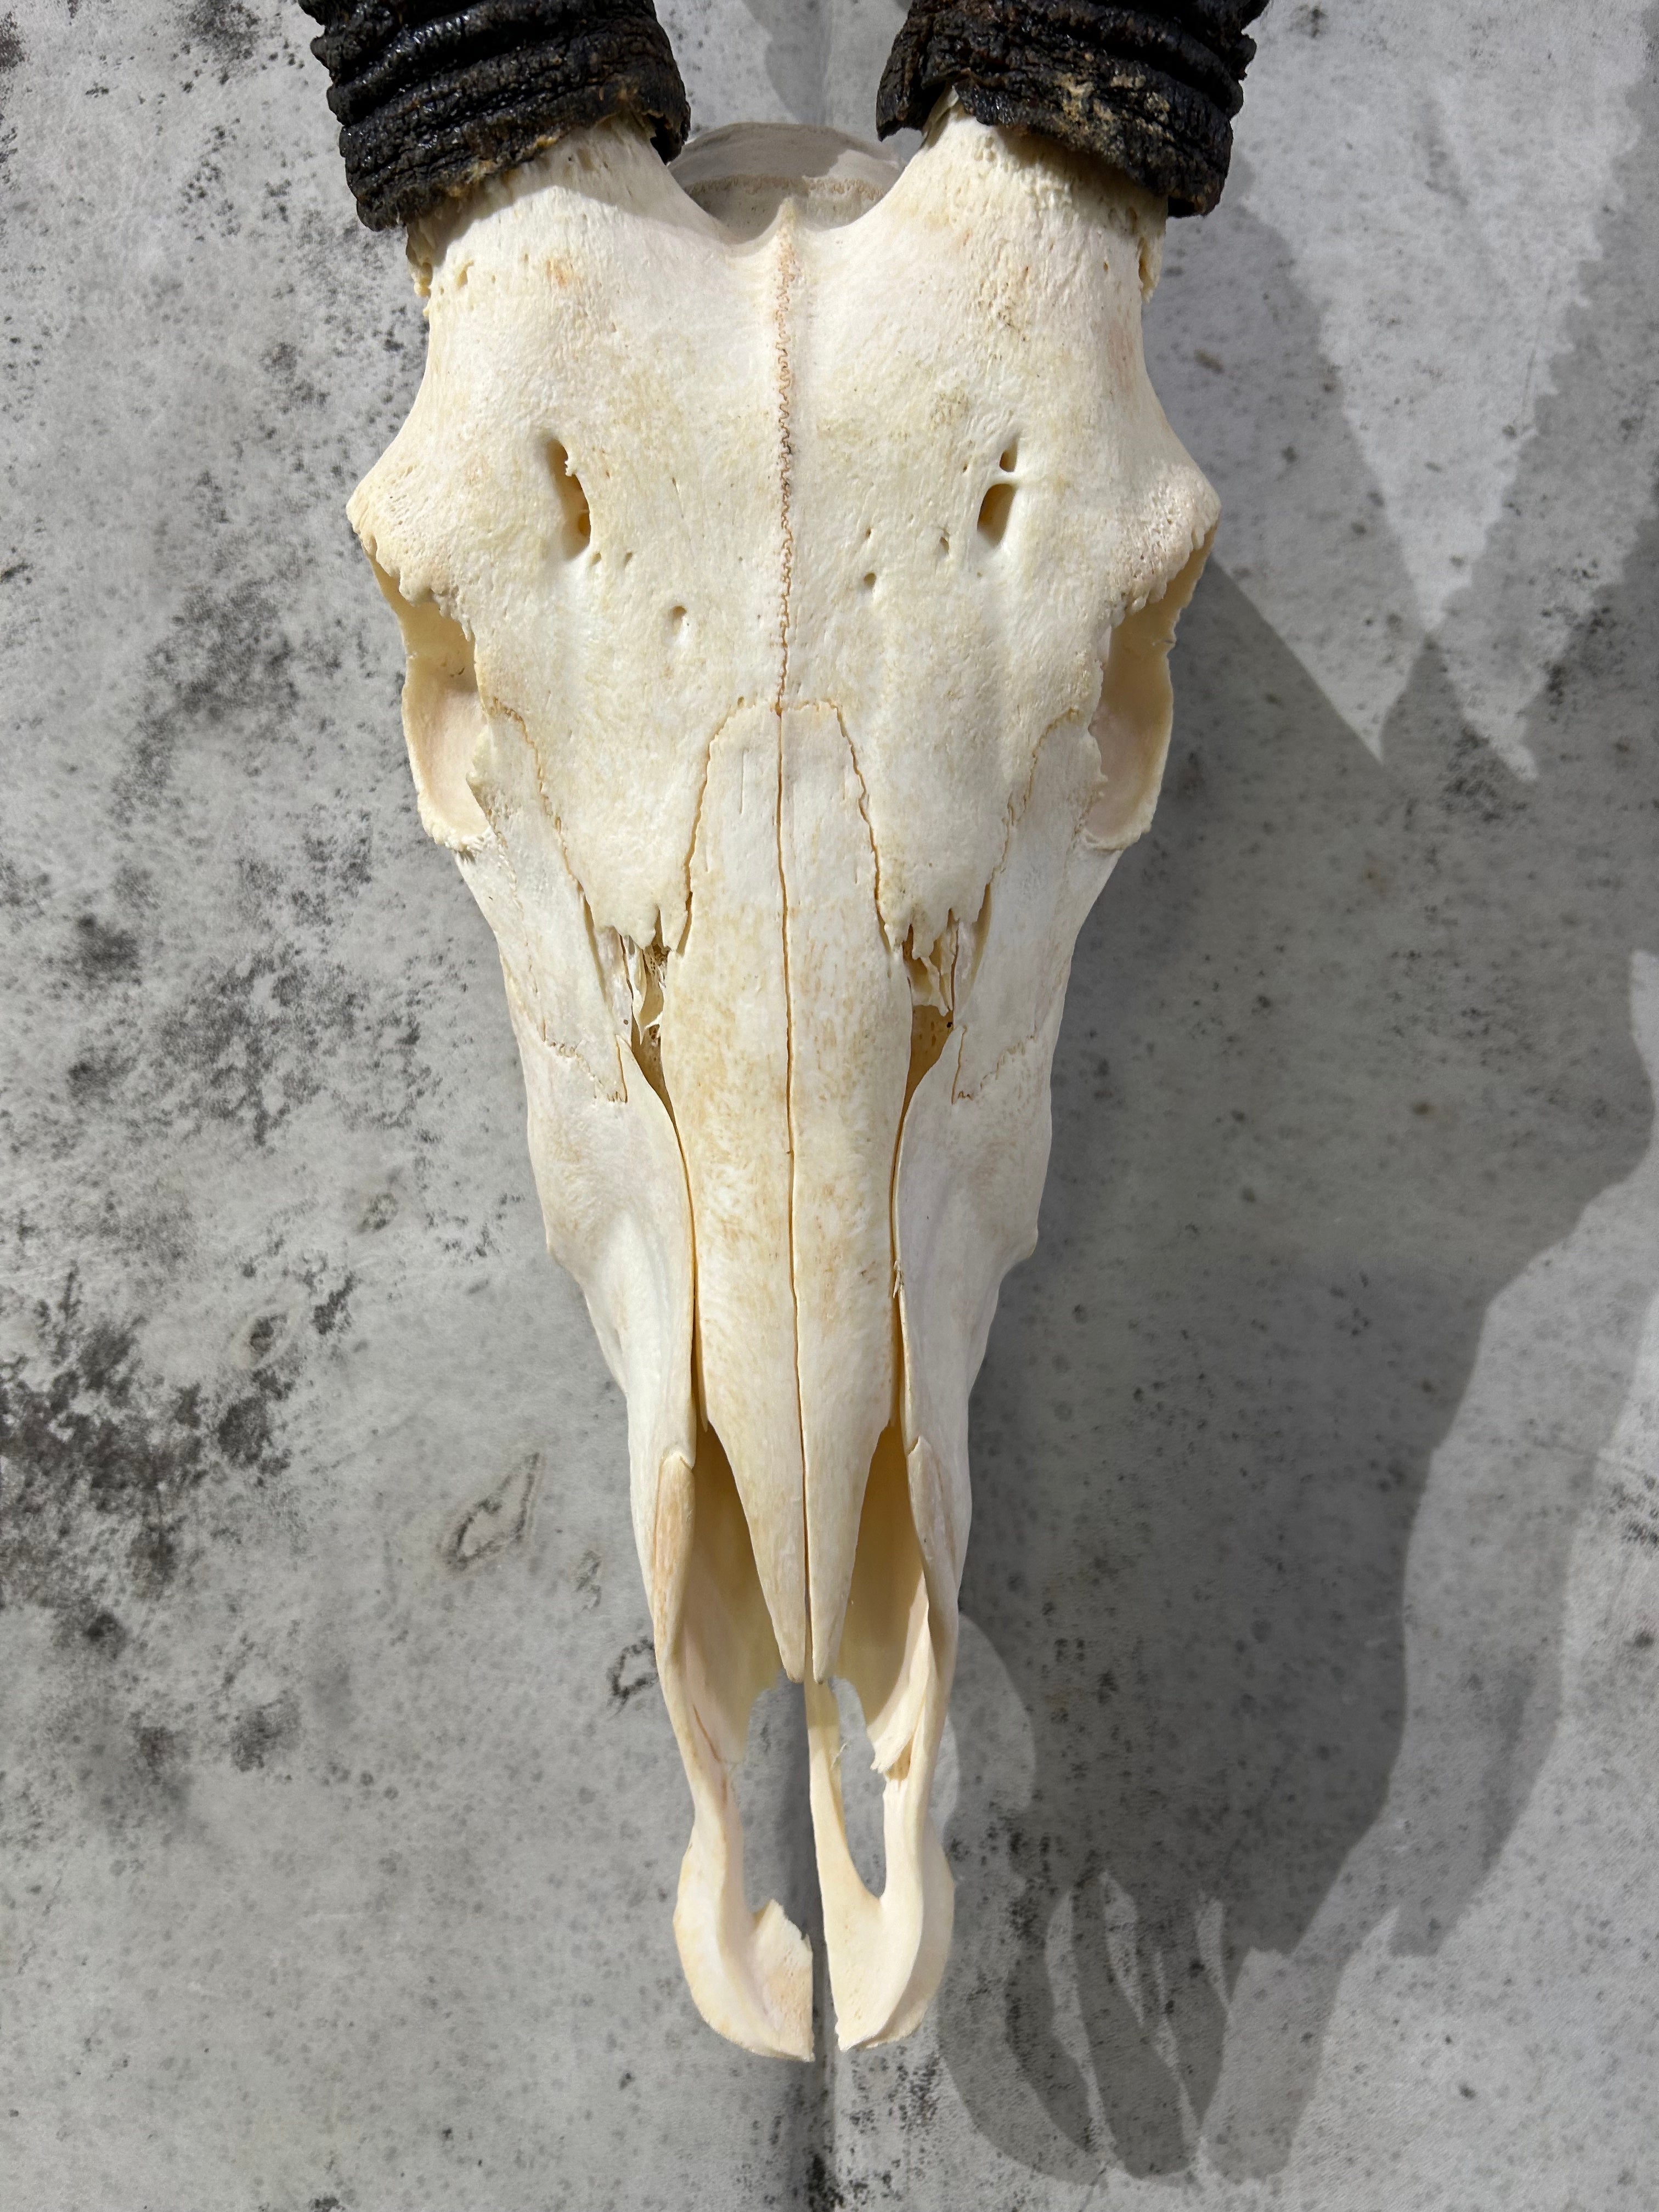 BIG Oryx Skull - African Antelope Horn + Gemsbok Skull (Horns are around 34 and 33 inches)